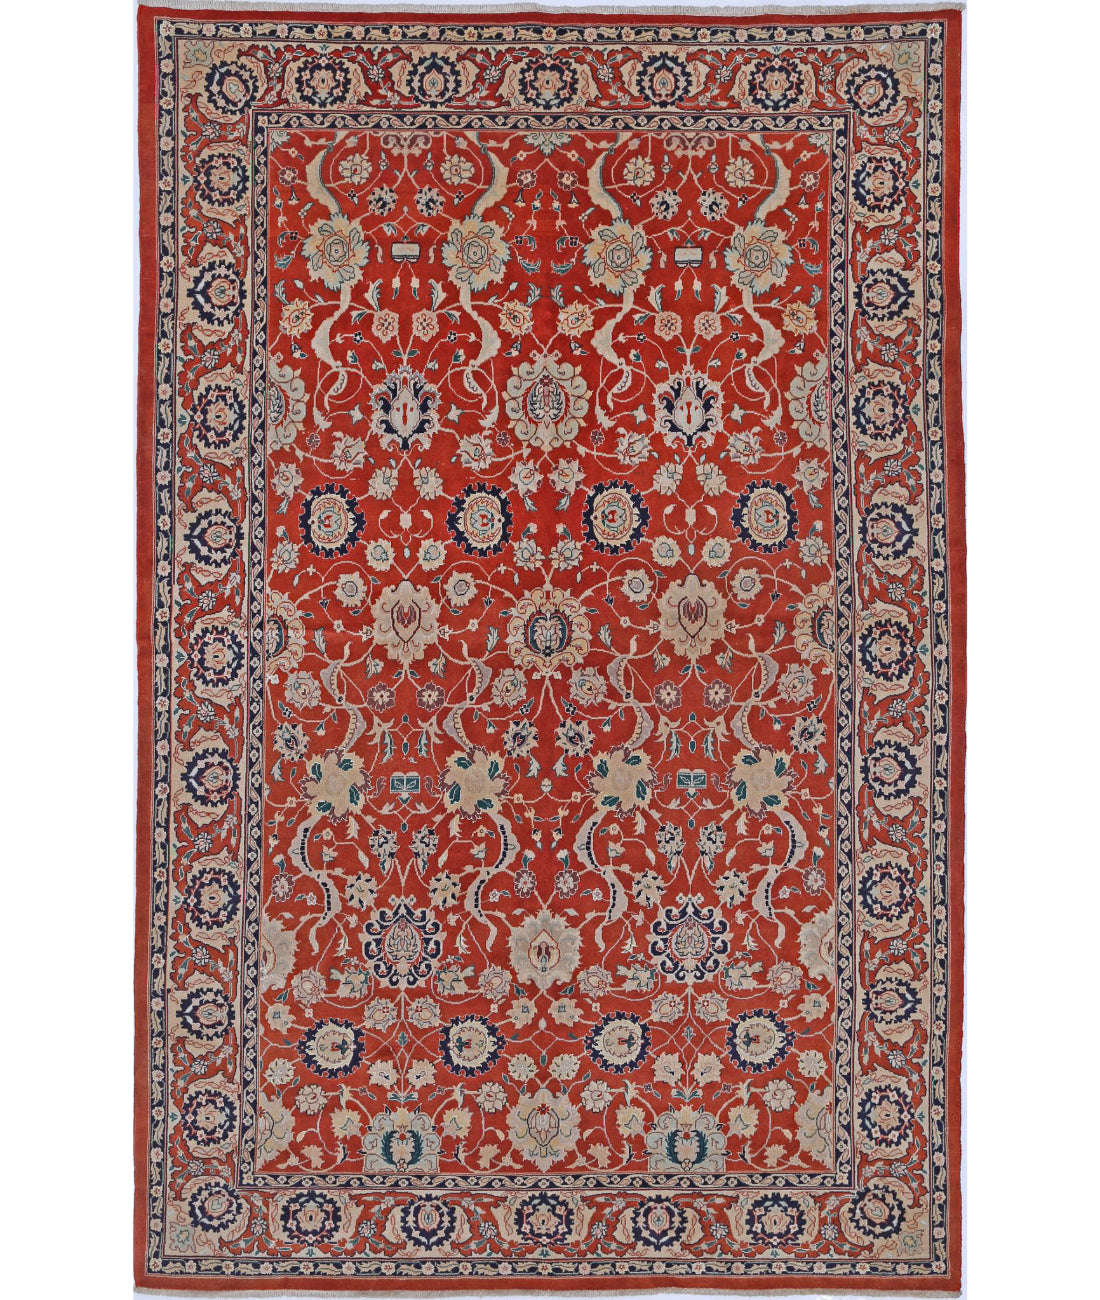 Hand Knotted Persian Tabriz Wool Rug - 5'8'' x 8'10'' 5'8'' x 8'10'' (170 X 265) / Red / Red